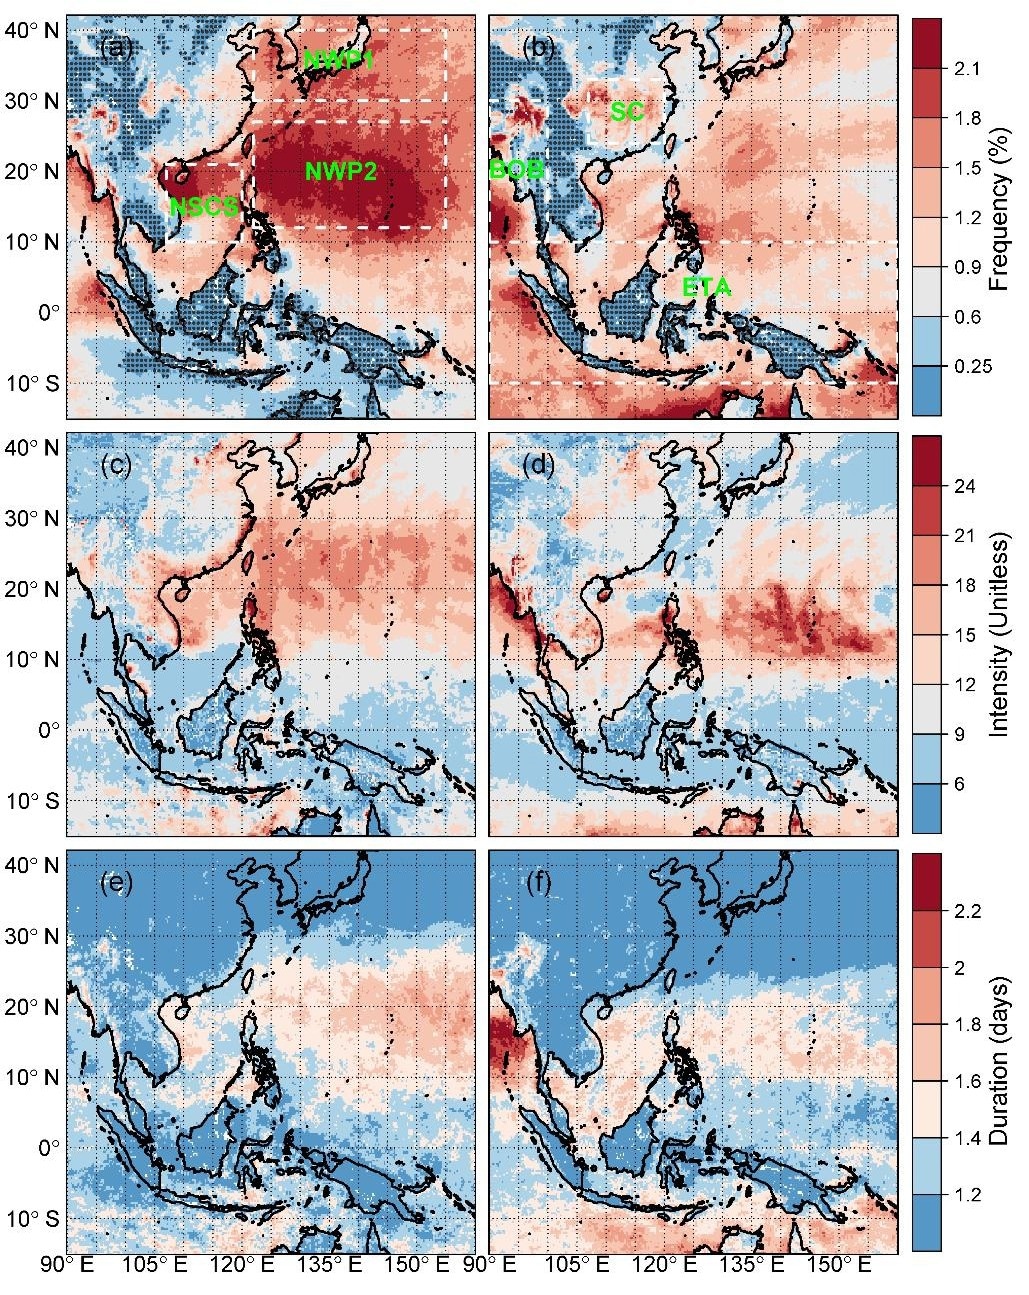 Study Discloses the Climatology, Variability, and Drivers of Compound Wind and Precipitation Extremes Across the Indo-Pacific.